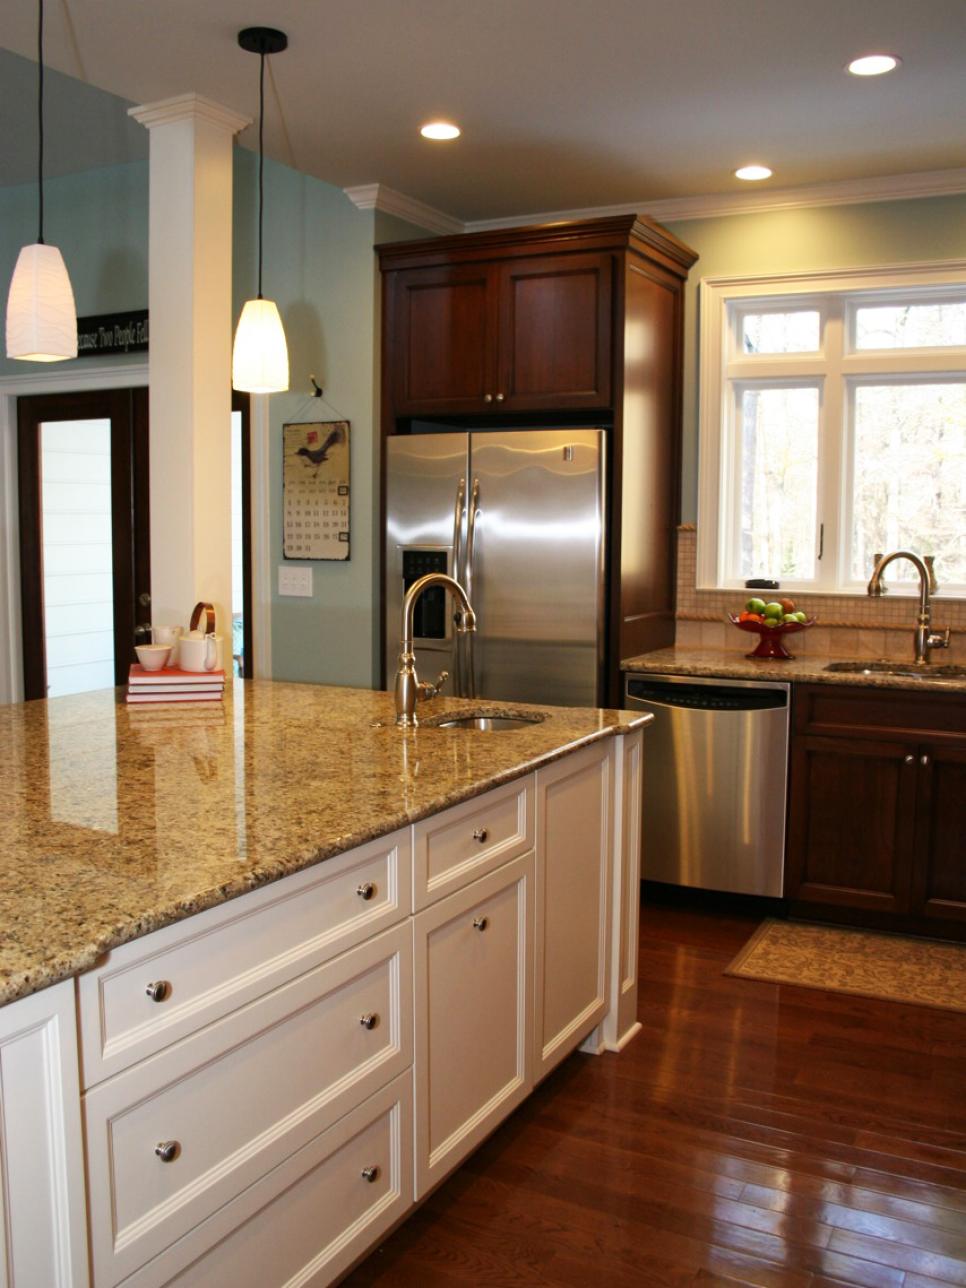 Neutral Kitchen With Large White Island & Pendant and Recessed Lights